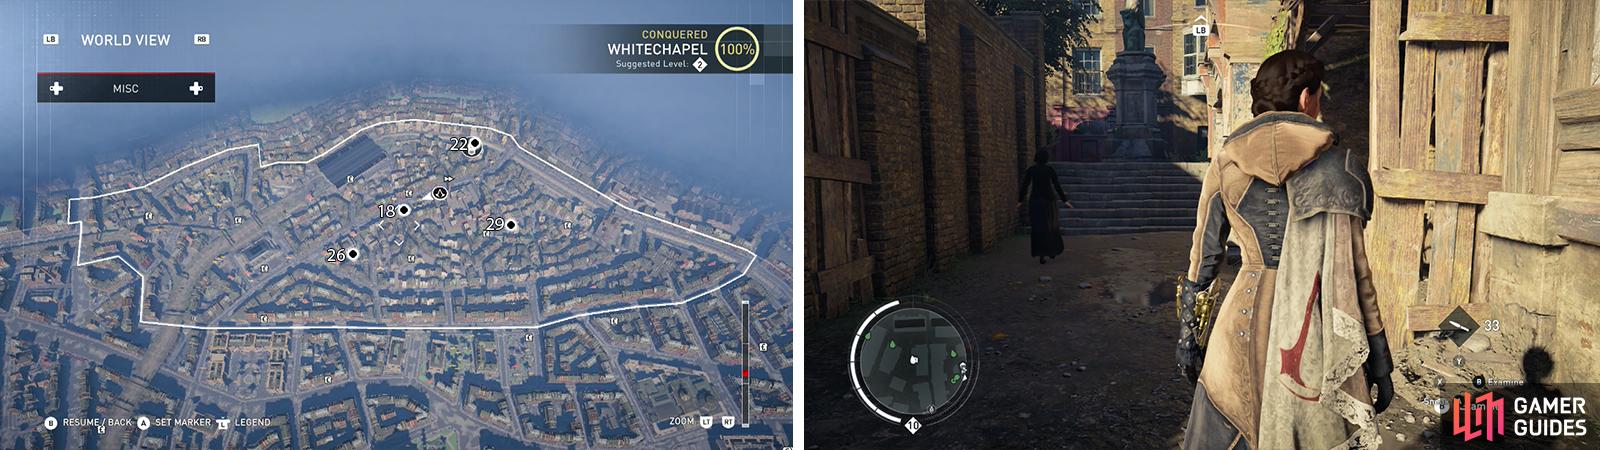 The Secrets of London can be found on the map (left). Location of Secret of London #29 pictured (right).